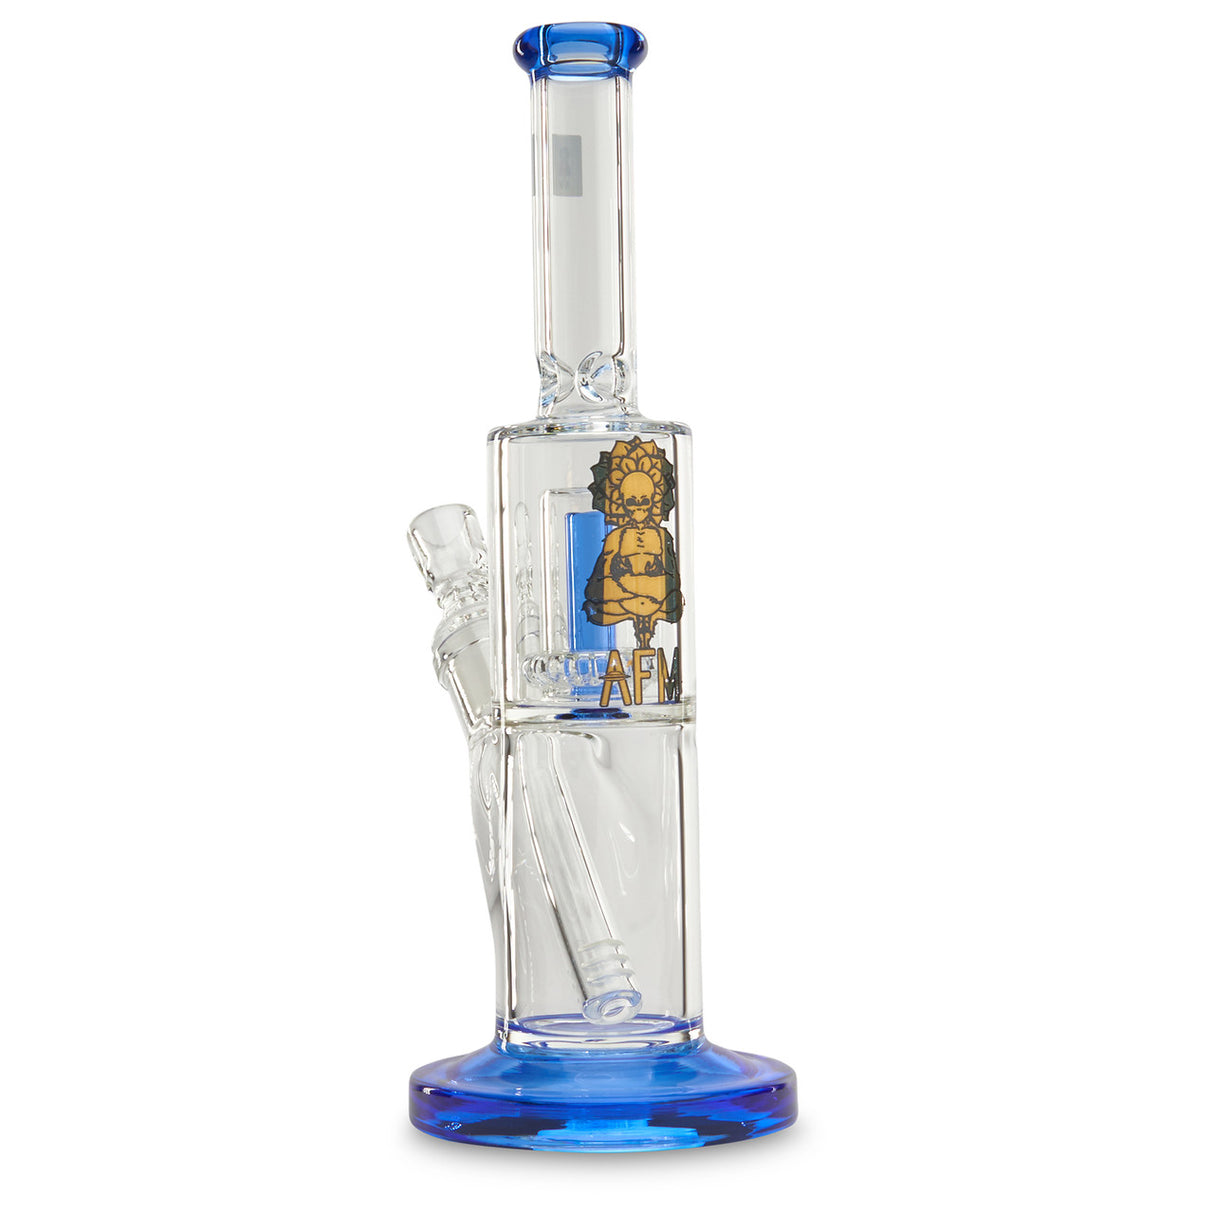 Cheap Glass Blue AFM Waterpipe For Sale